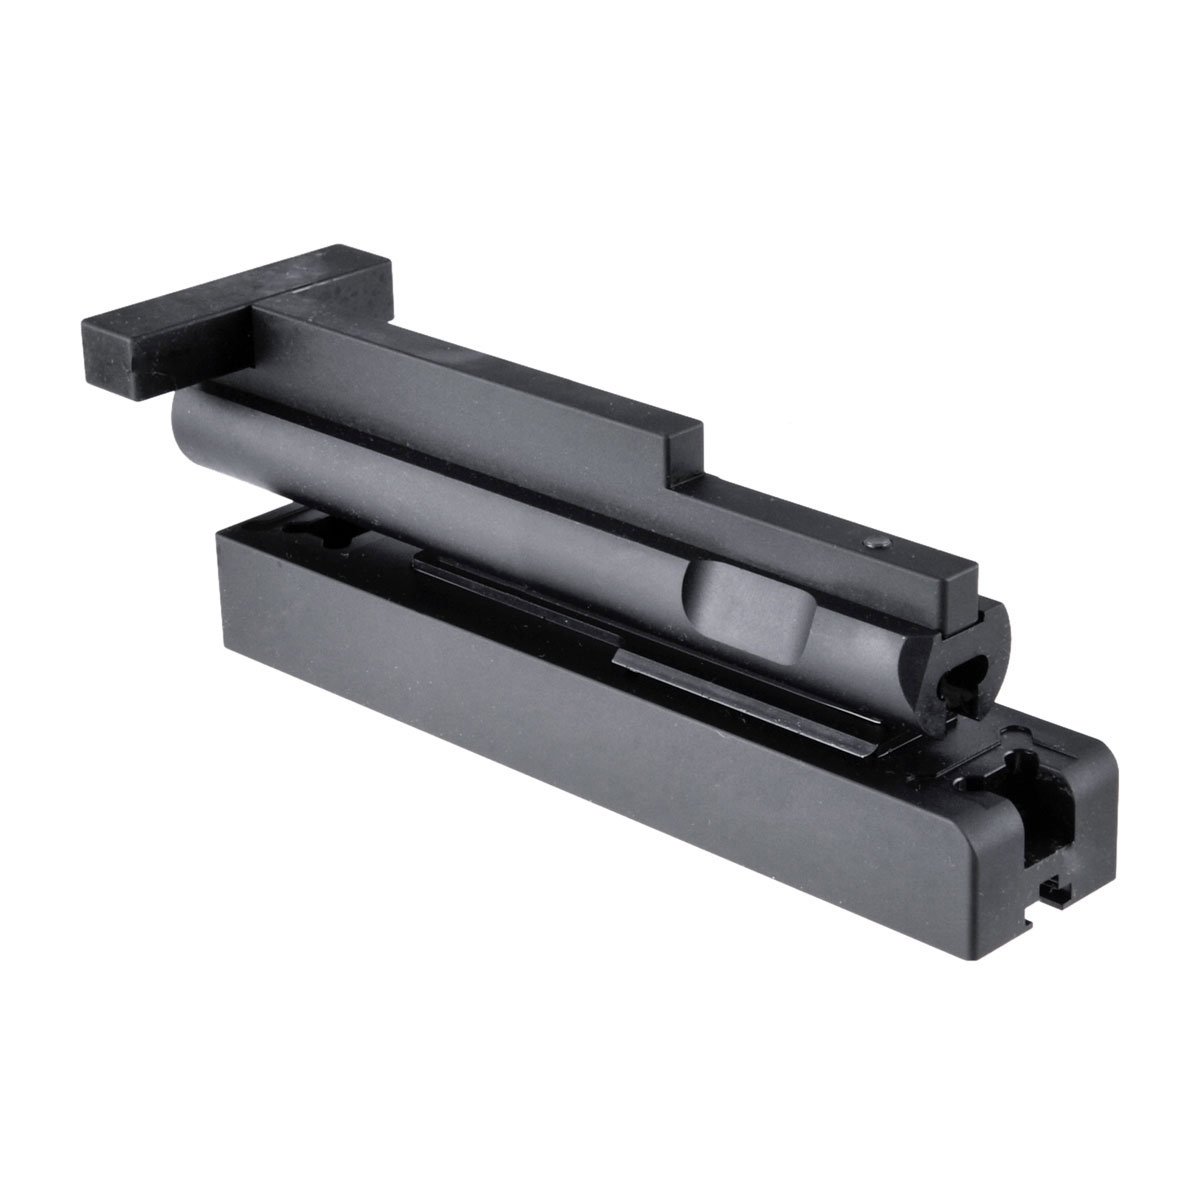 THE DEVICE MANUFACTURING LLC. - MK3 DEVICE &quot;LITE&quot; AR-15 UPPER RECEIVER FIXTURE